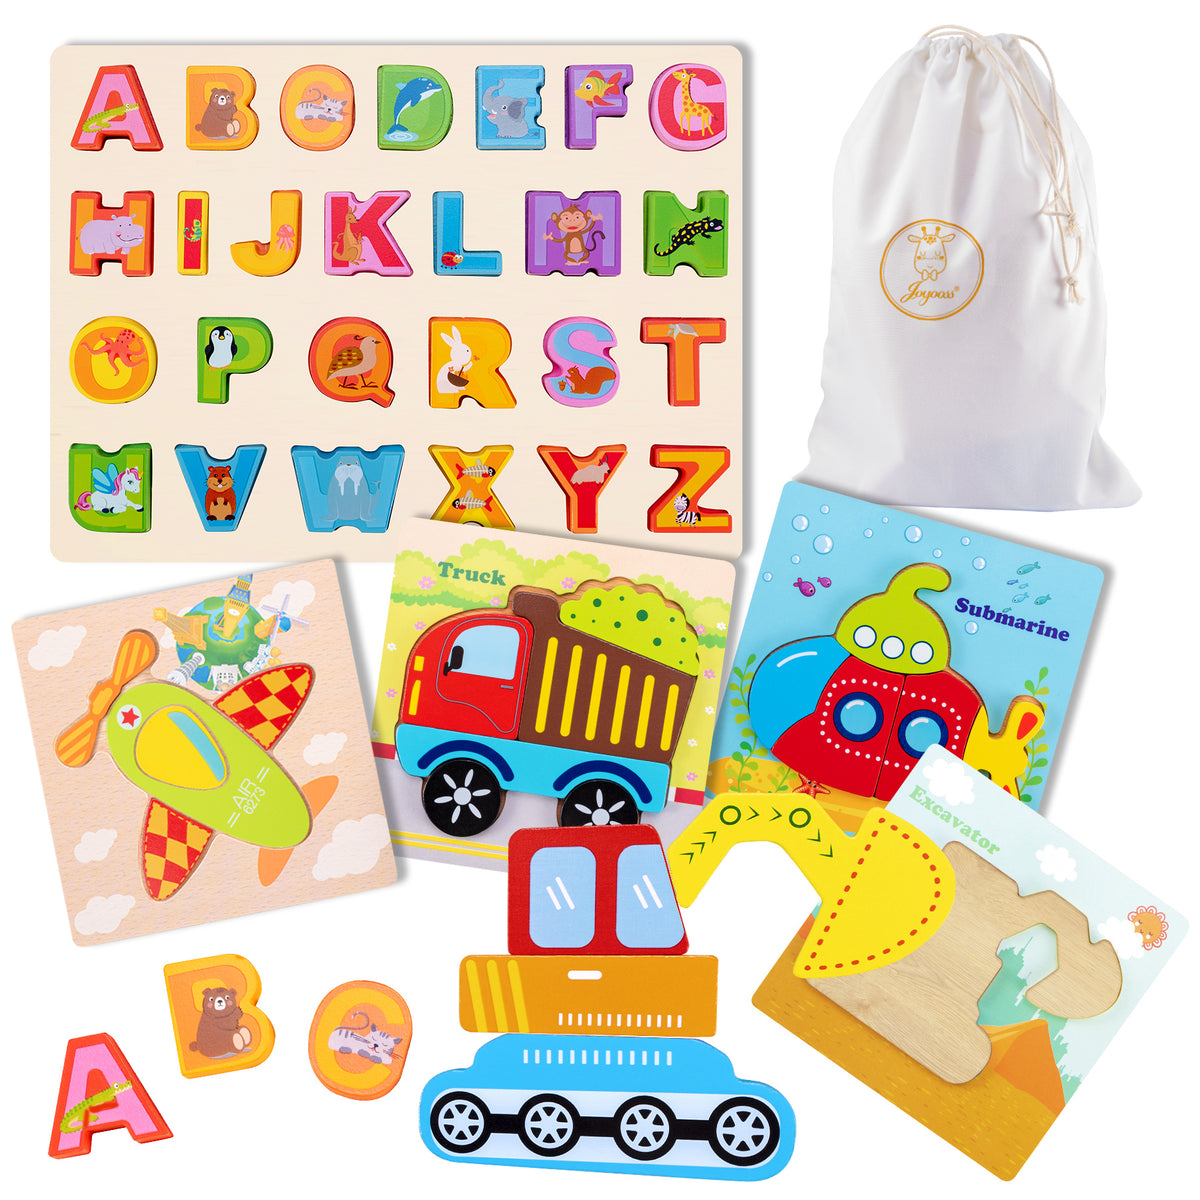 JOYOOSS Wooden Puzzles for Toddlers, Jigsaw Puzzle Board, Boys & Girls Educational Wooden Toys with Storage Bag - Transportation & Alphabet - 5 Pack